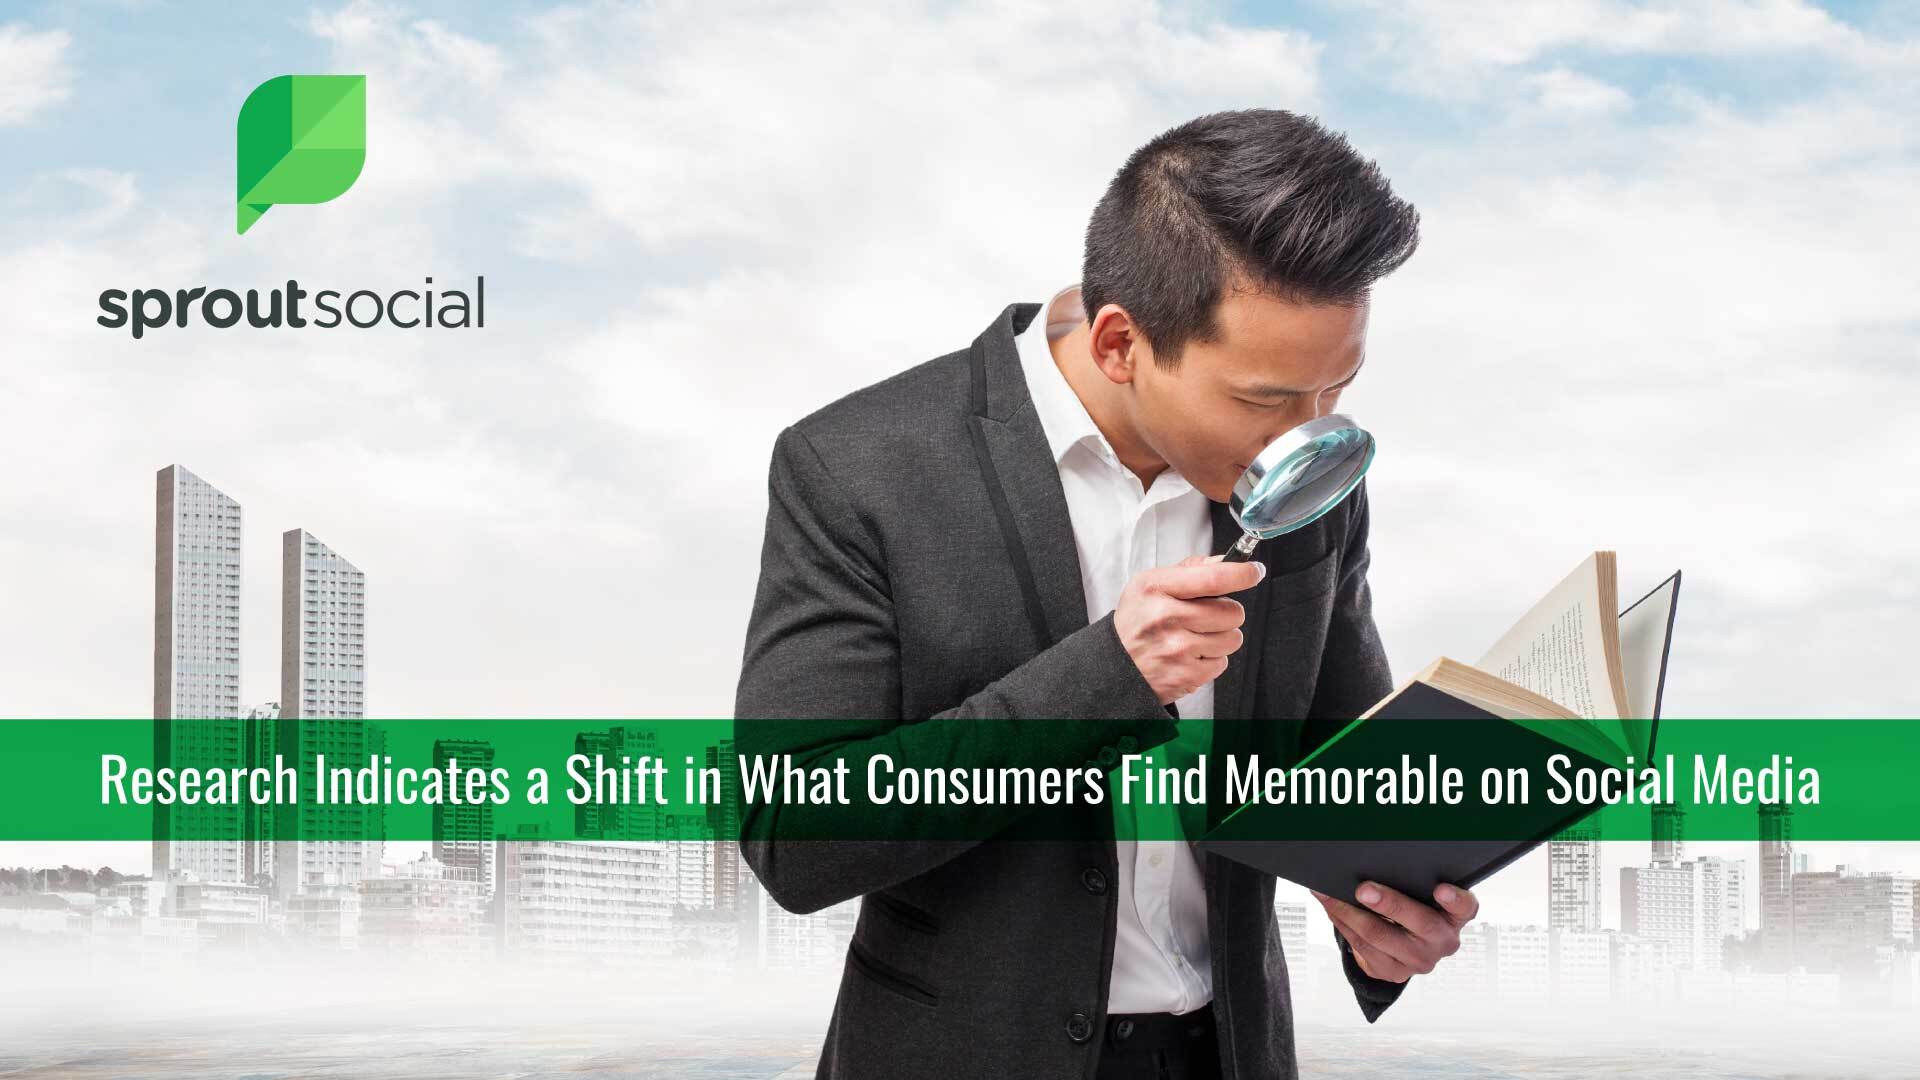 New Research Indicates a Shift in What Consumers Find Memorable on Social Media